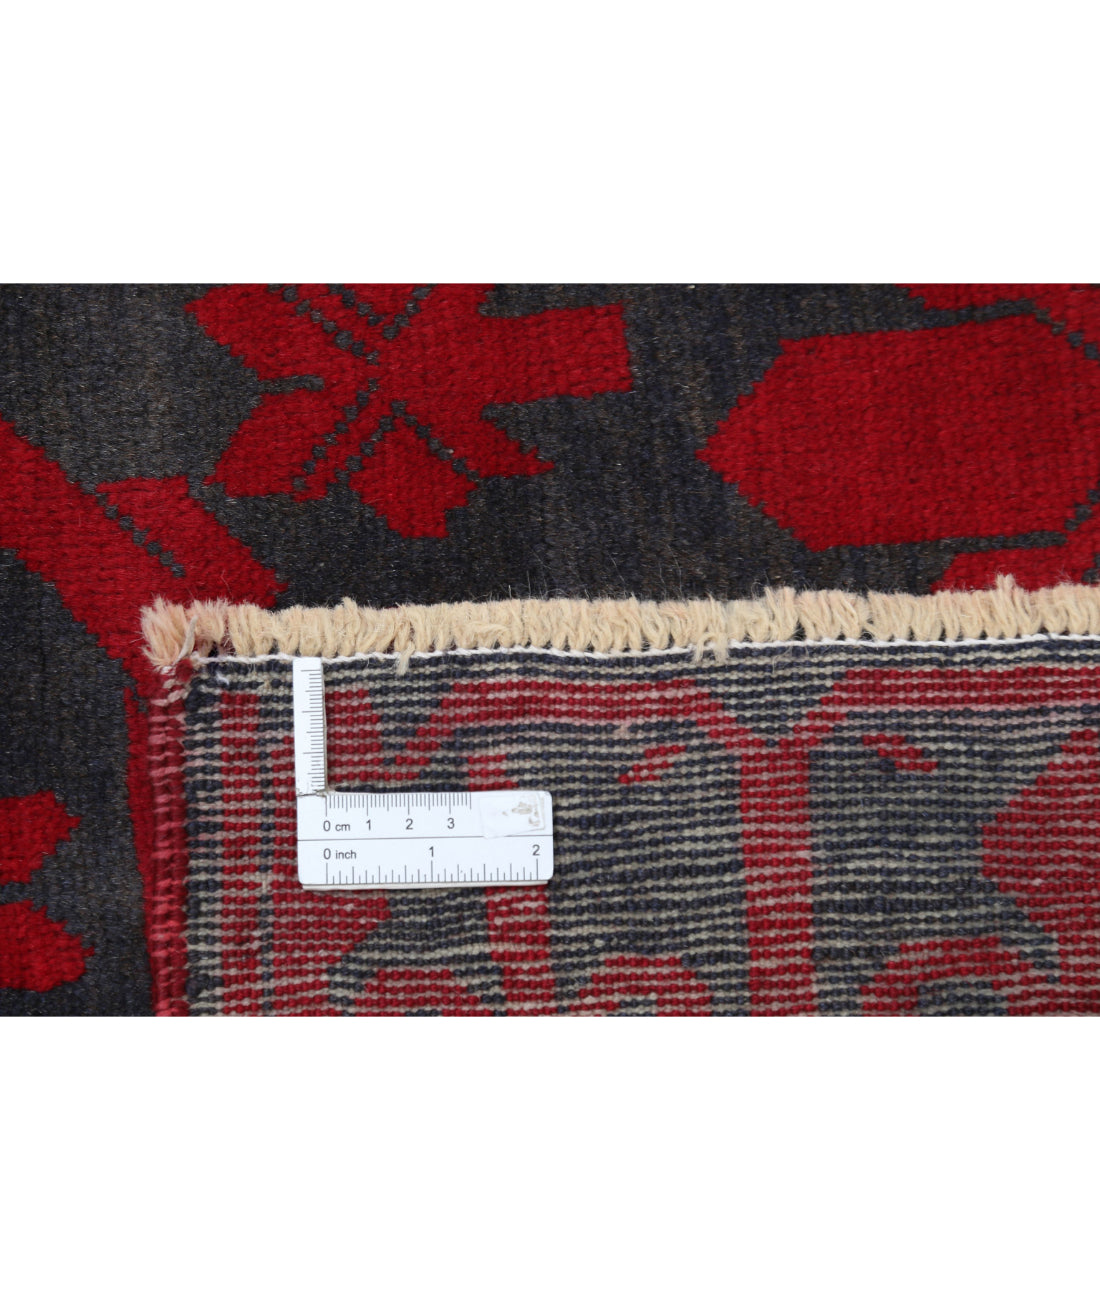 Baluch 2'9'' X 4'7'' Hand-Knotted Wool Rug 2'9'' x 4'7'' (83 X 138) / Red / N/A